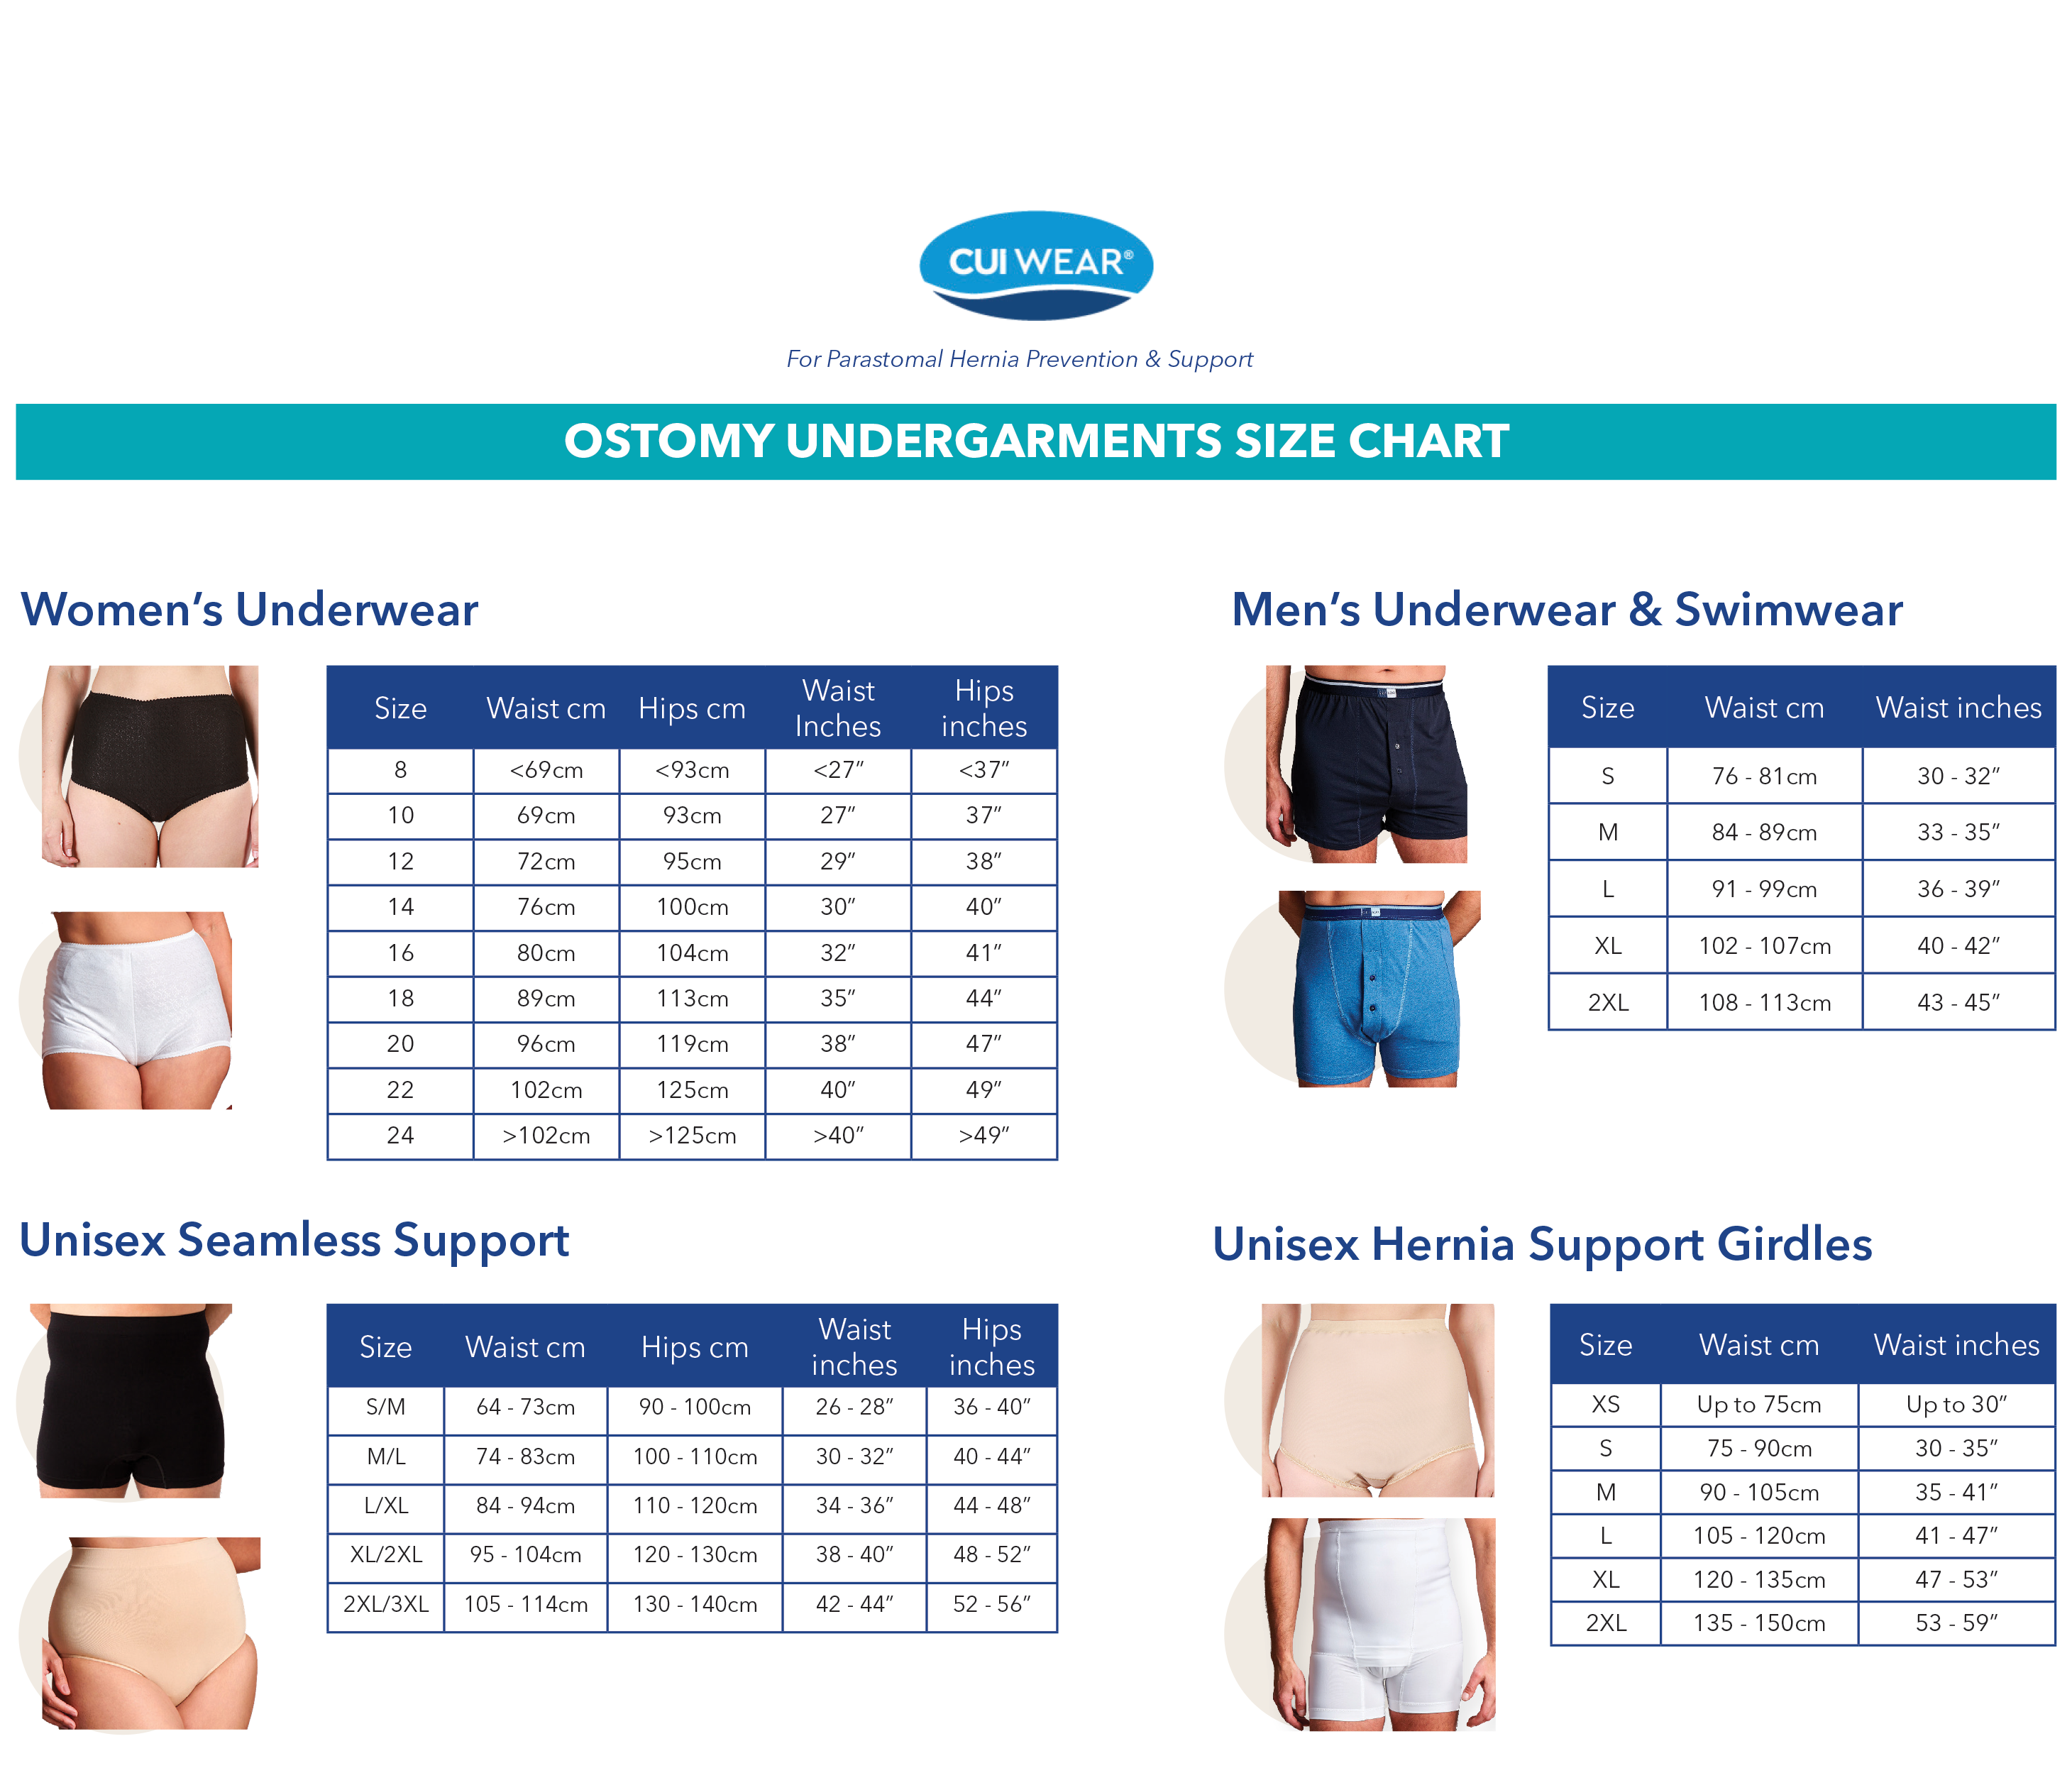 CUI Mens Hernia Low Waist Support Girdle With Legs - 1 each, SMALL, WHITE-2